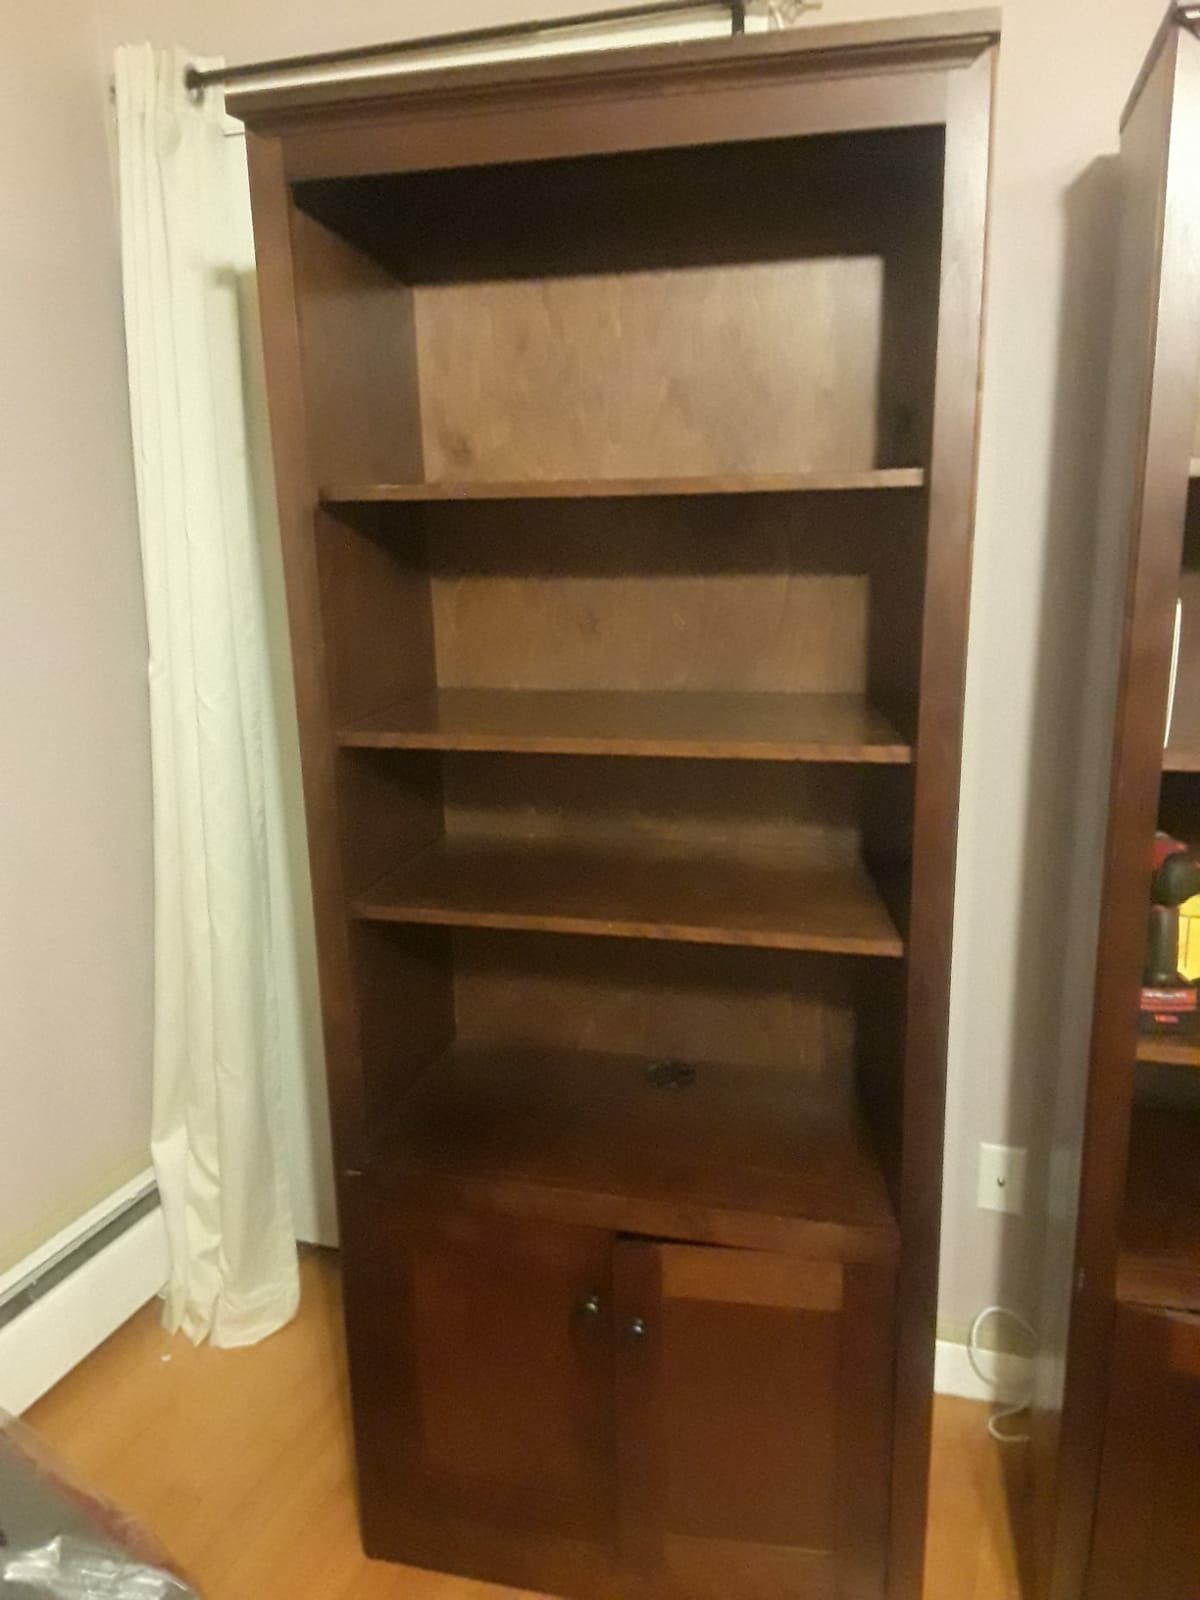 Two wooden bookshelves with cabinets